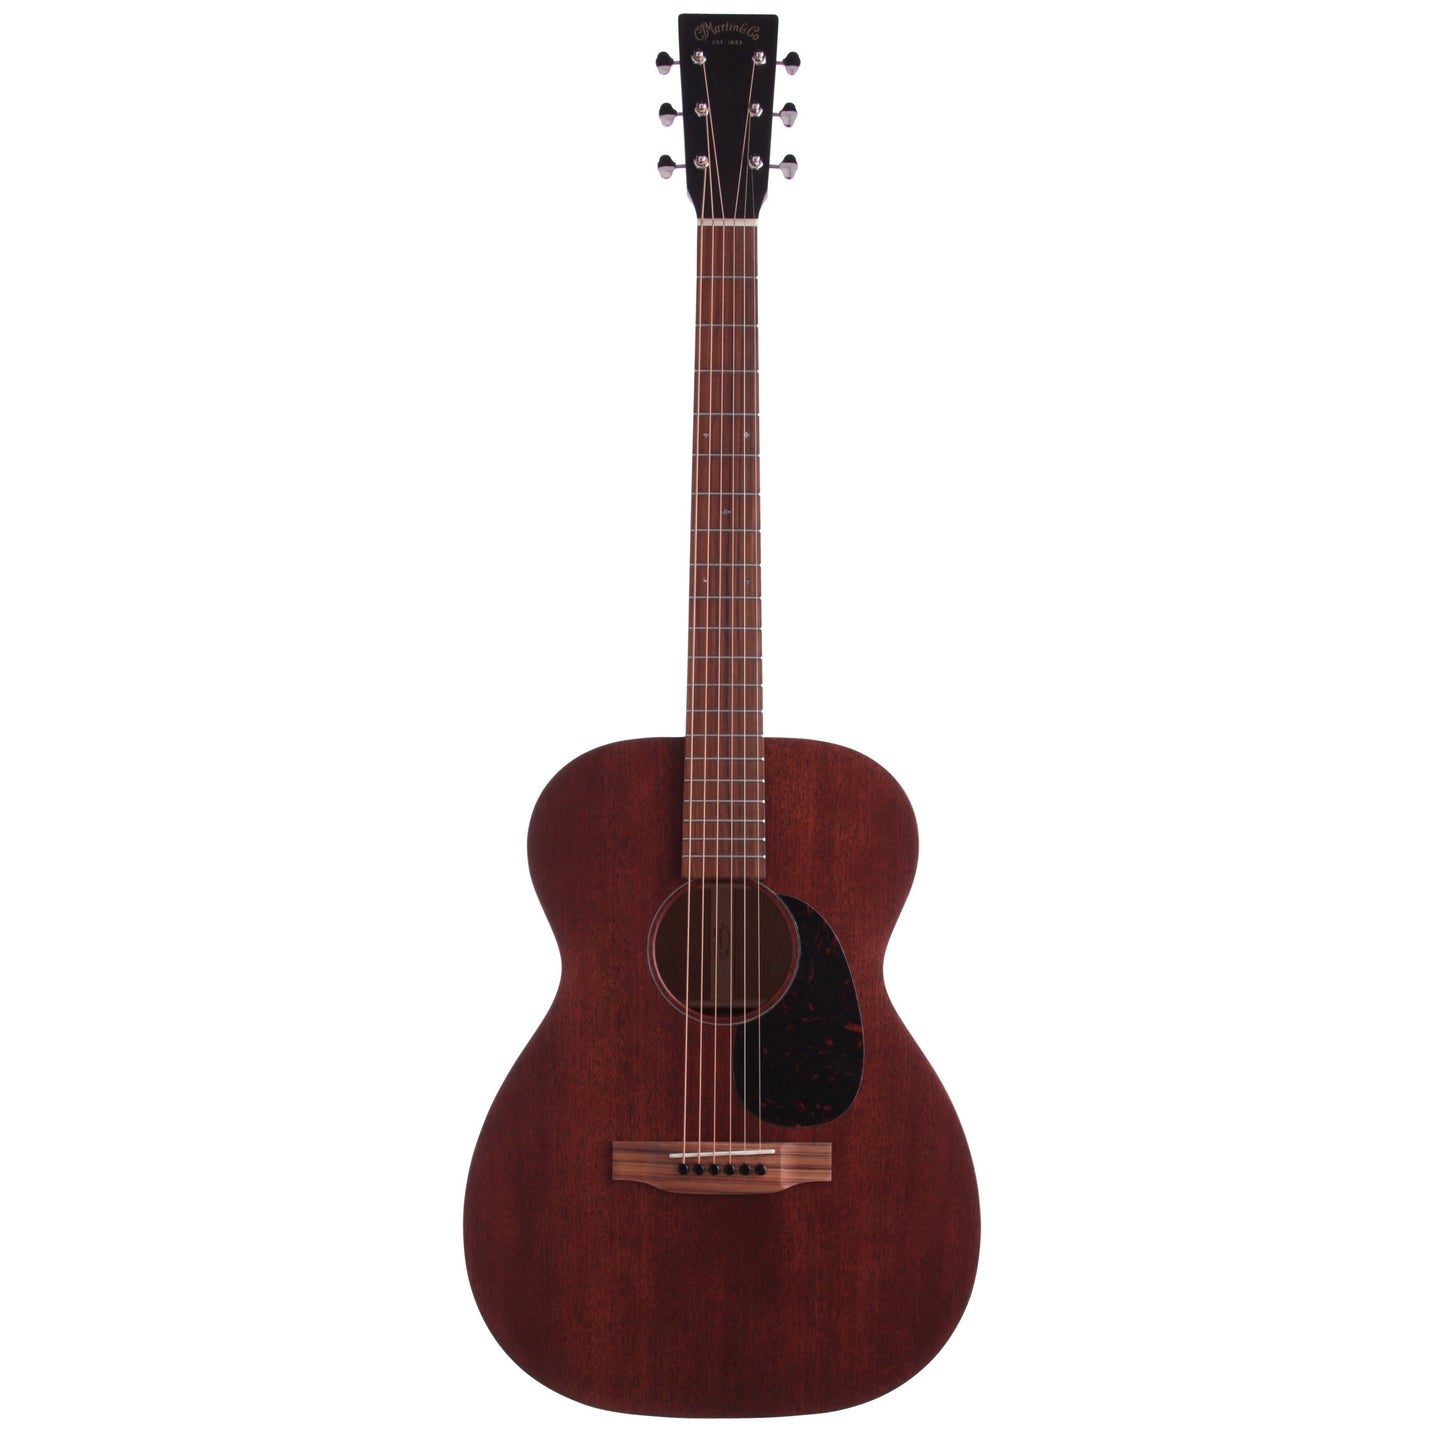 Martin 000-15M Acoustic Guitar (with Case), Natural